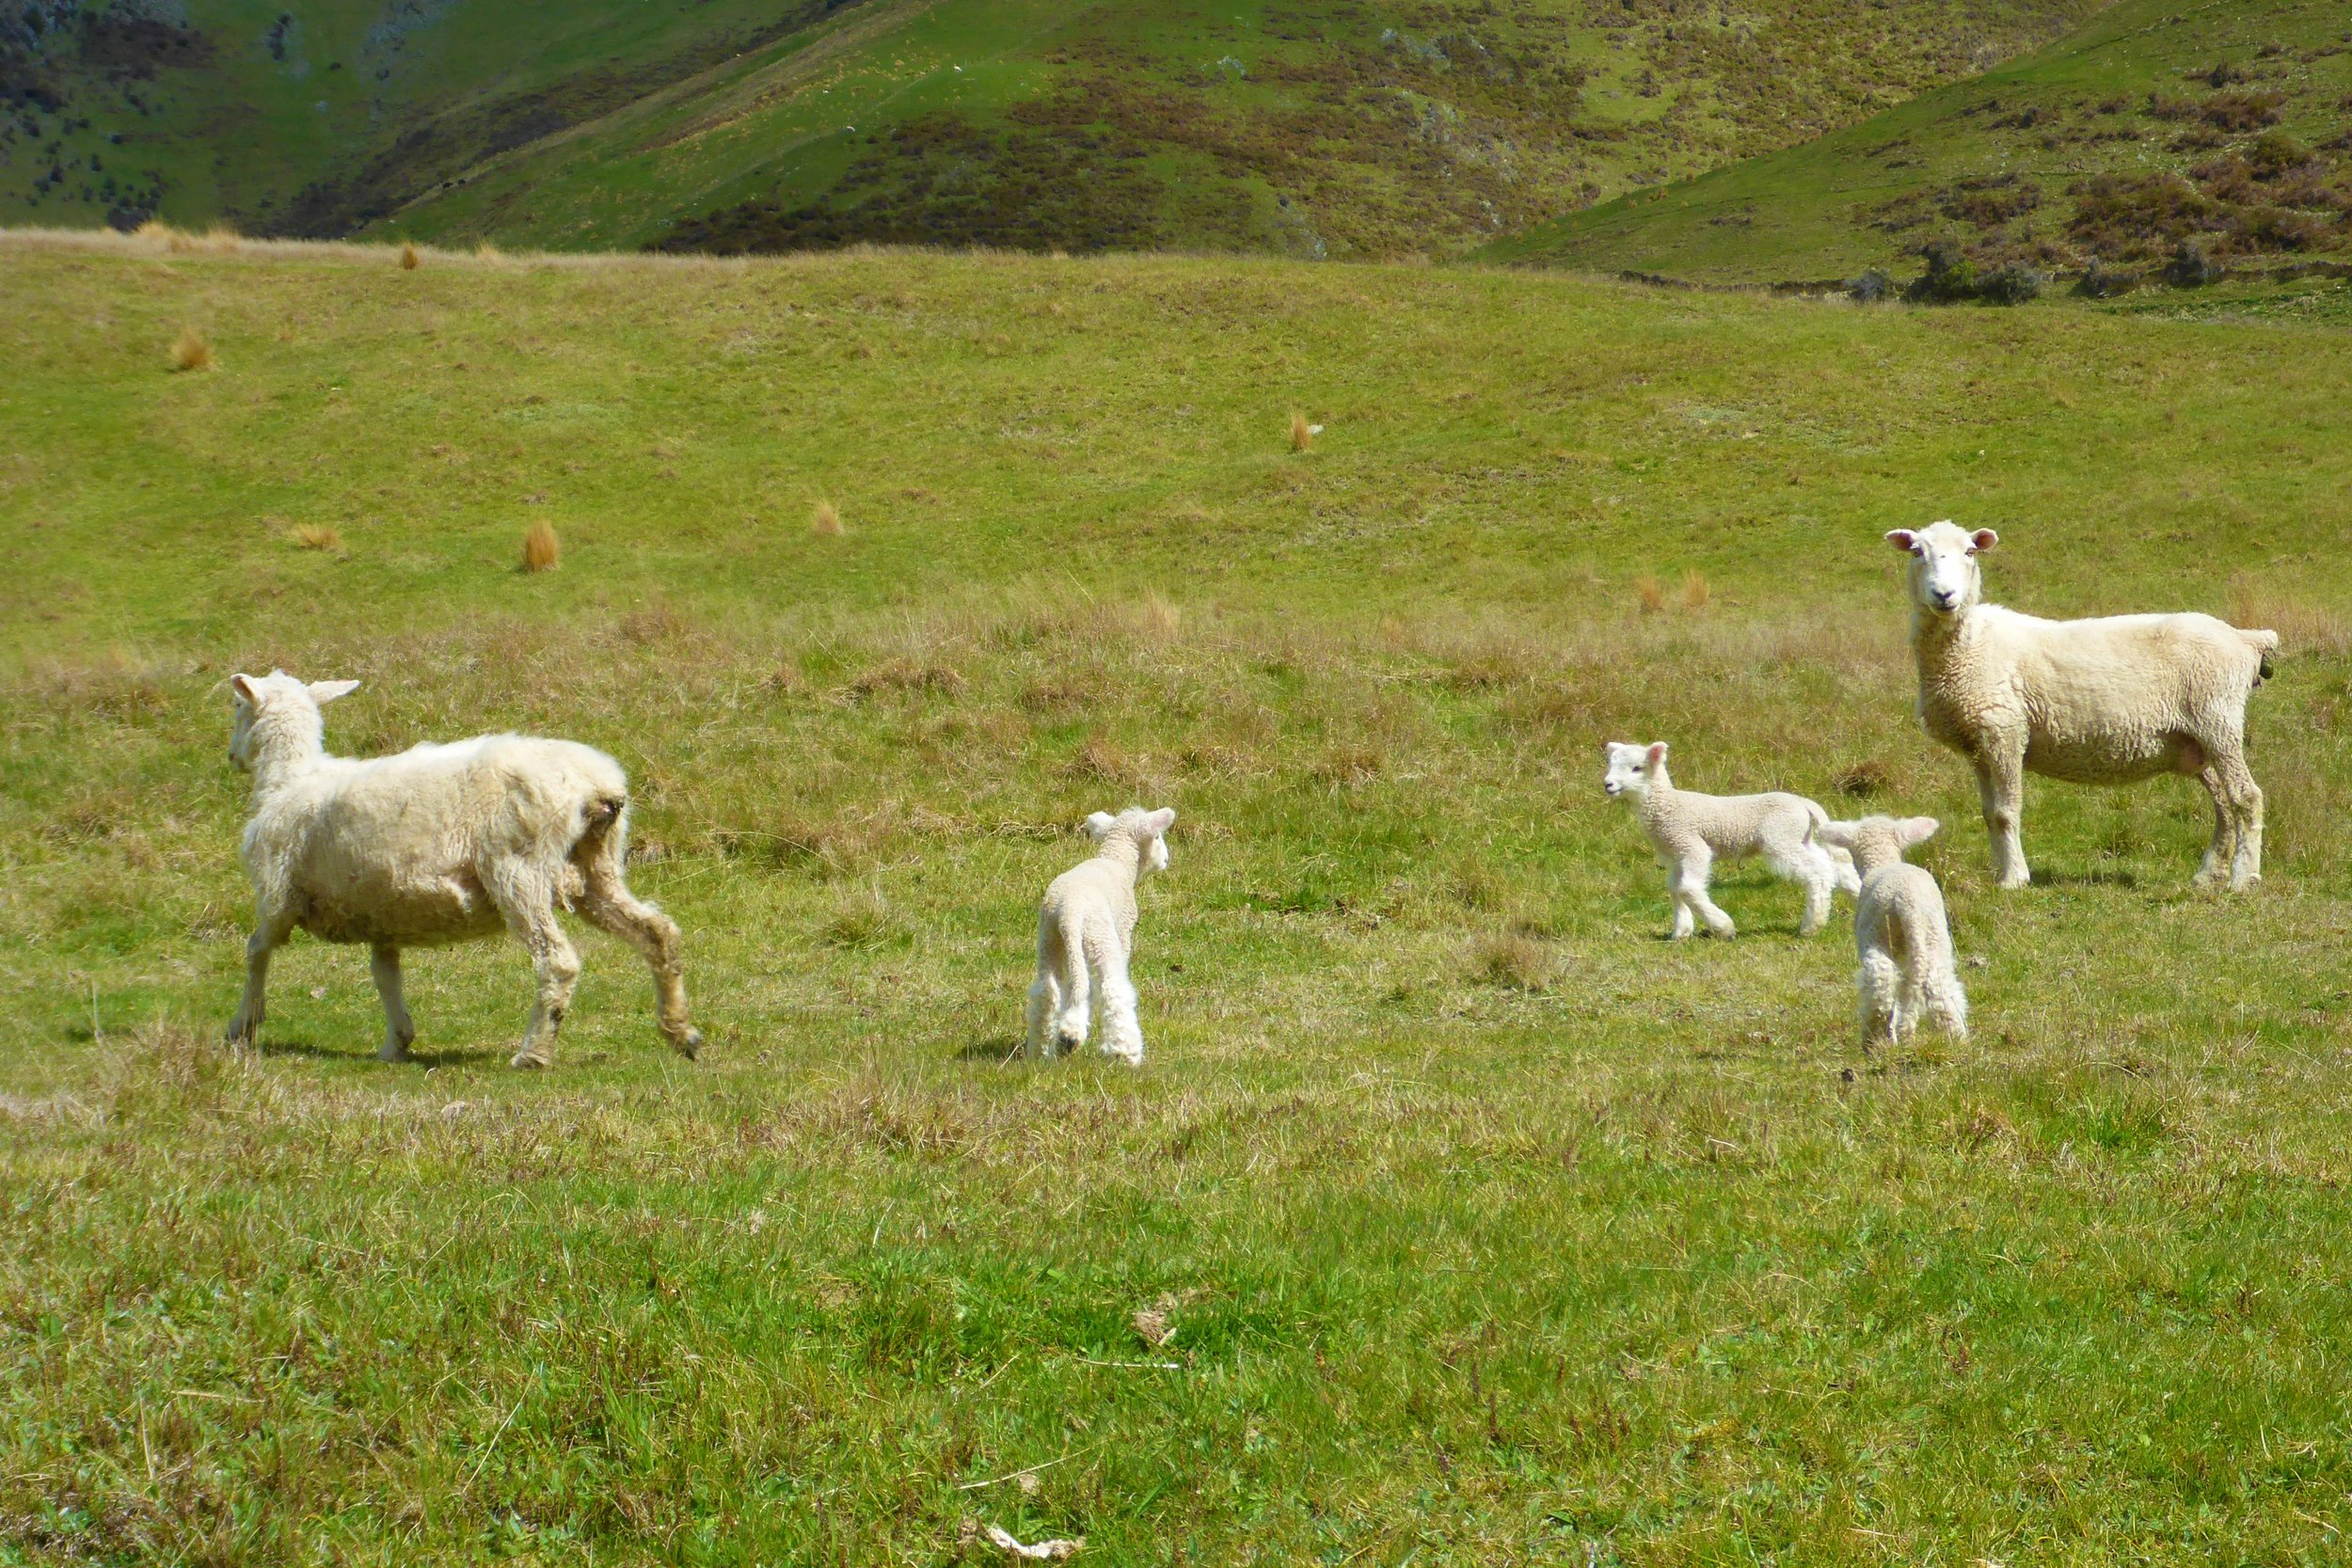 Lambs in spring! a common sight in NZ